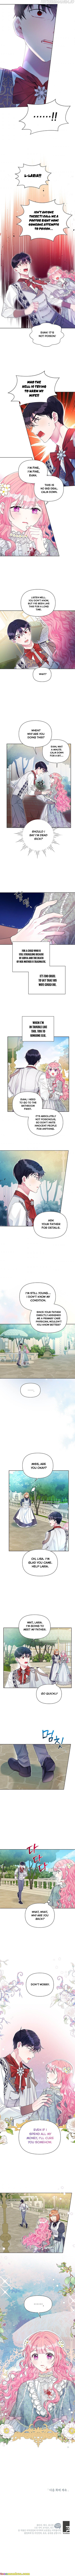 I Became the Daughter-In-Law of the Villain Because I’m Terminally Ill! Chapter 27 - Page 3